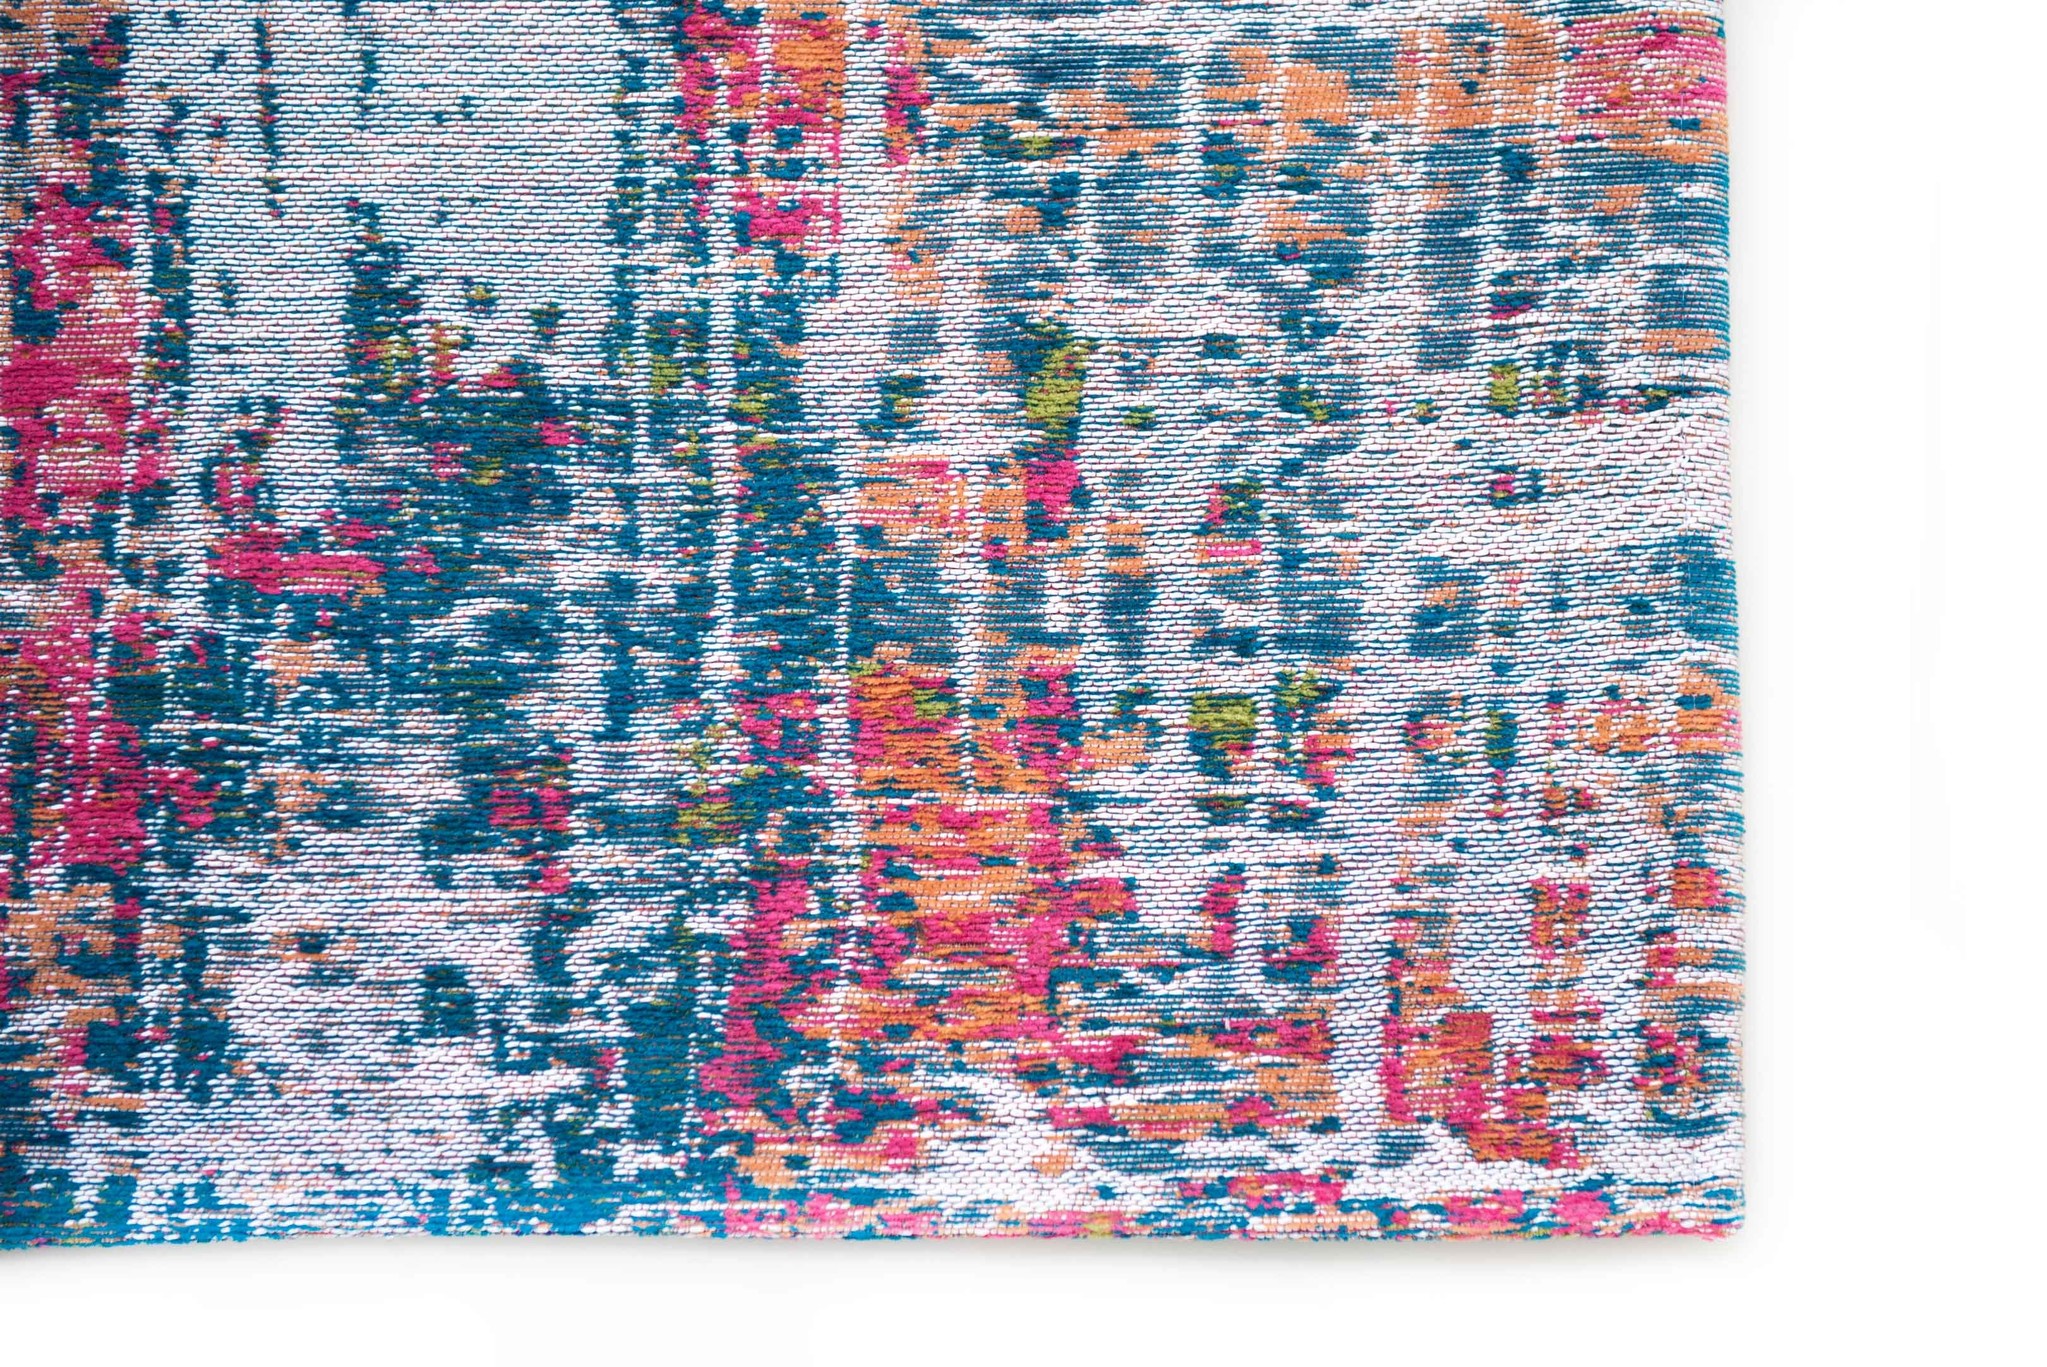 Abstract Multi Flatwoven Rug ☞ Size: 5' 7" x 8' (170 x 240 cm)